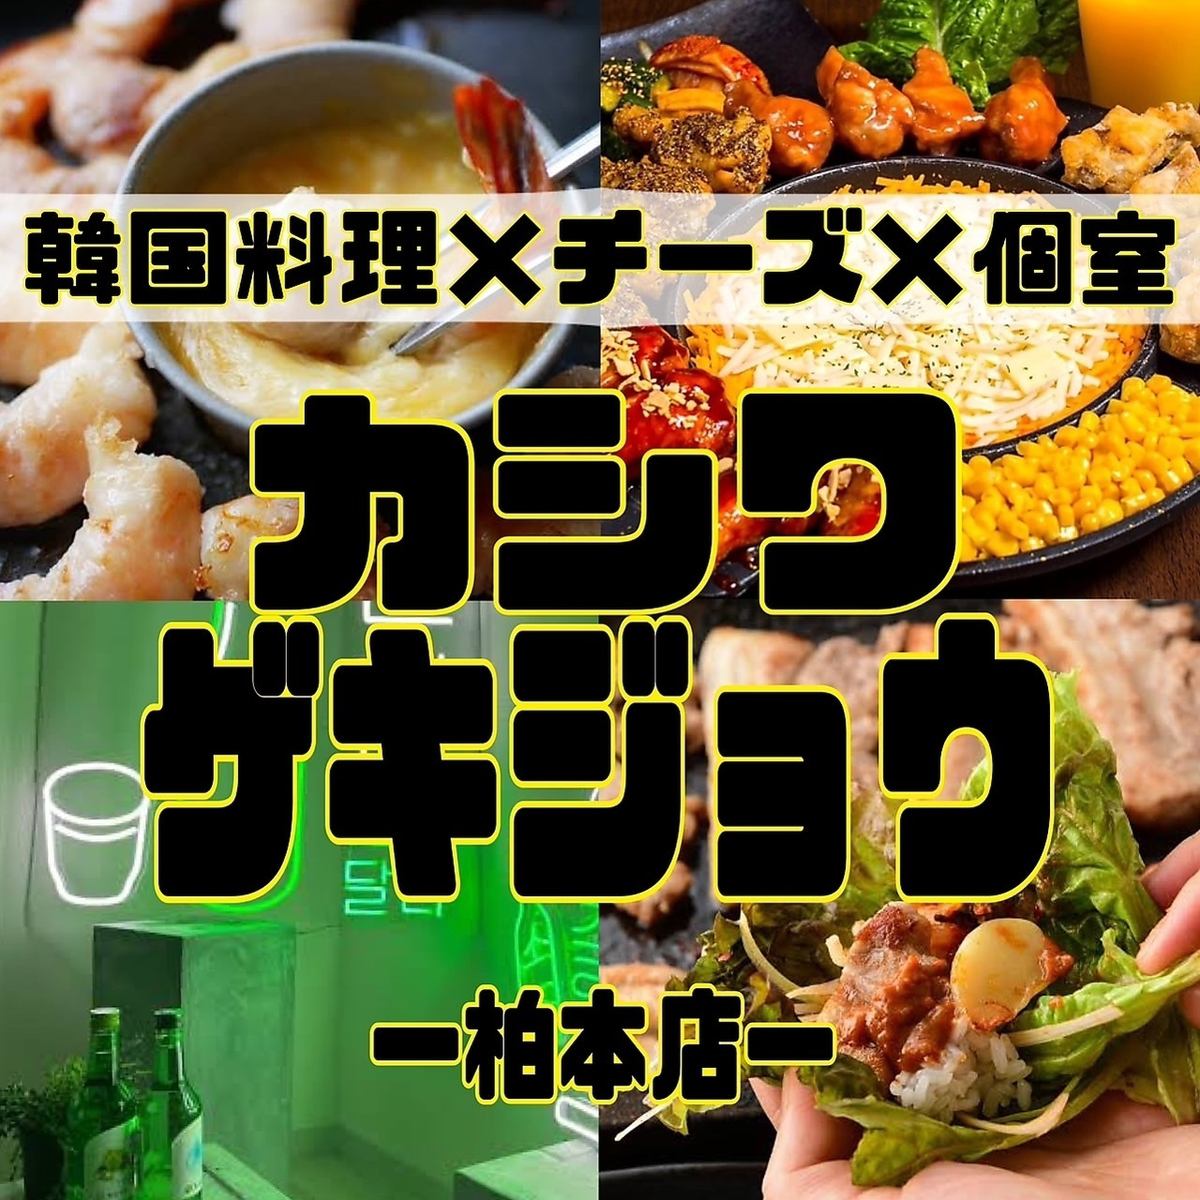 All-you-can-eat and drink for 3 hours including Choa Chicken/Samgyeopsal from 3,000 yen!